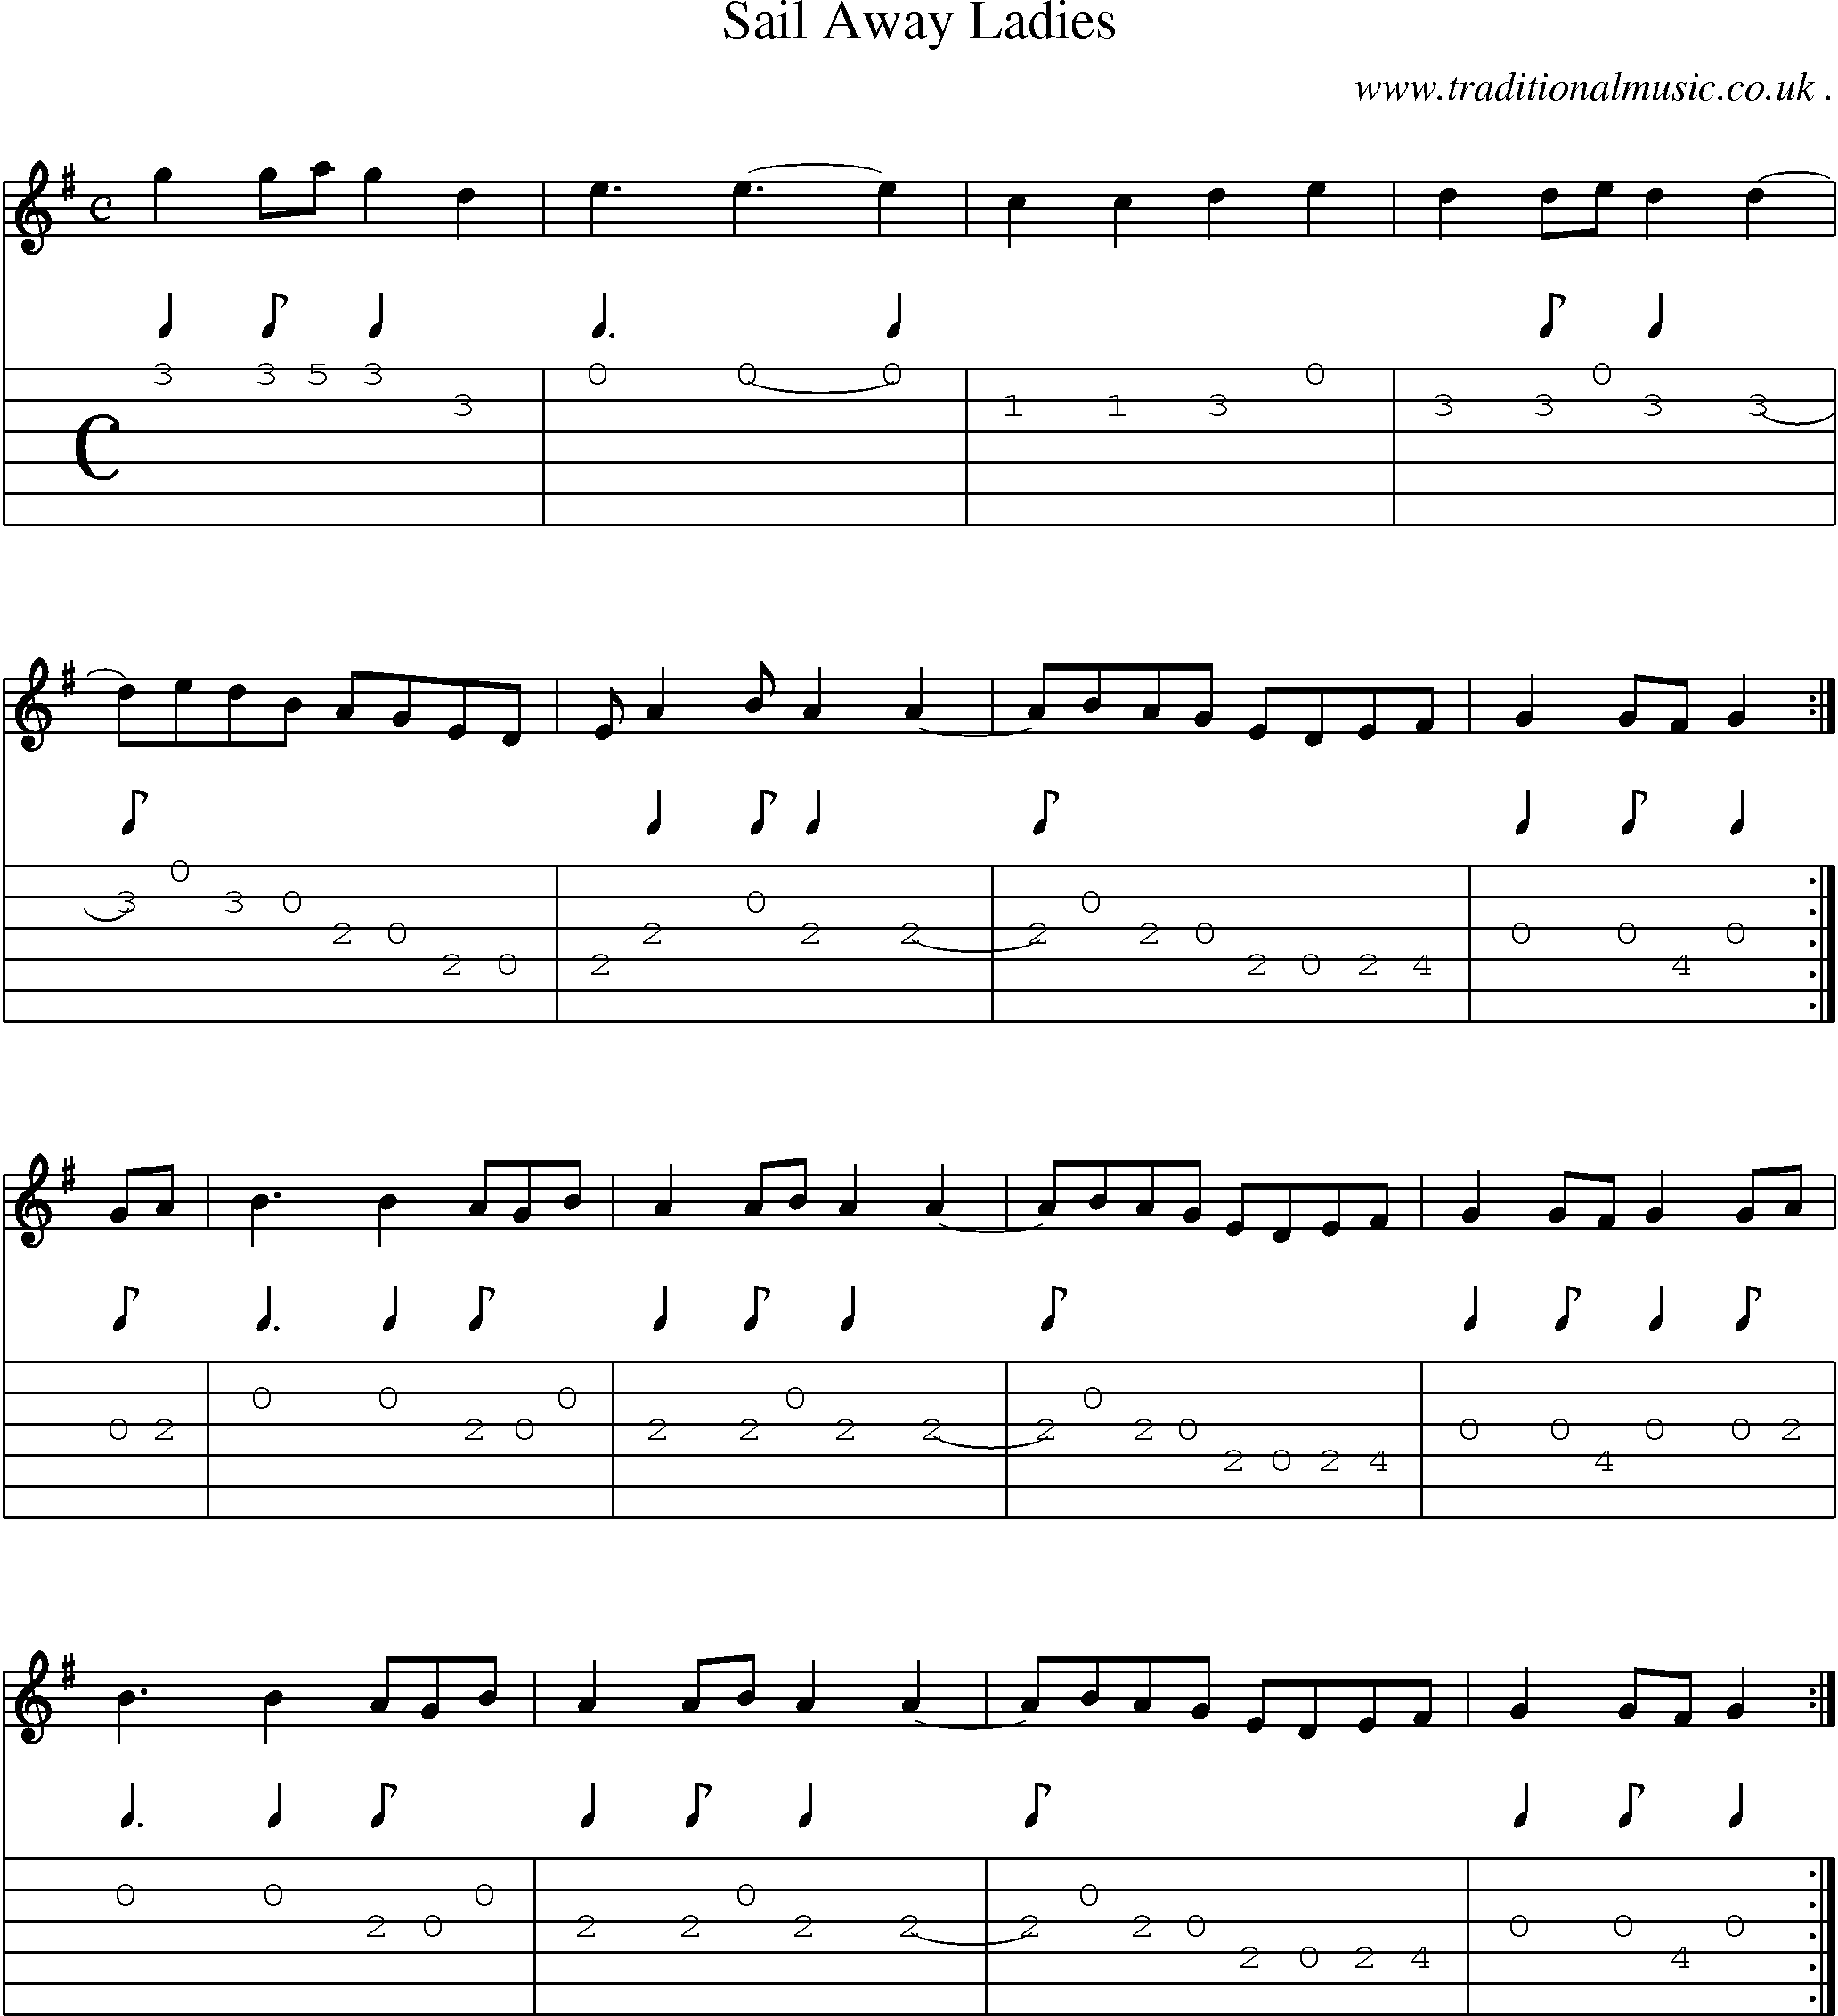 Sheet-Music and Guitar Tabs for Sail Away Ladies